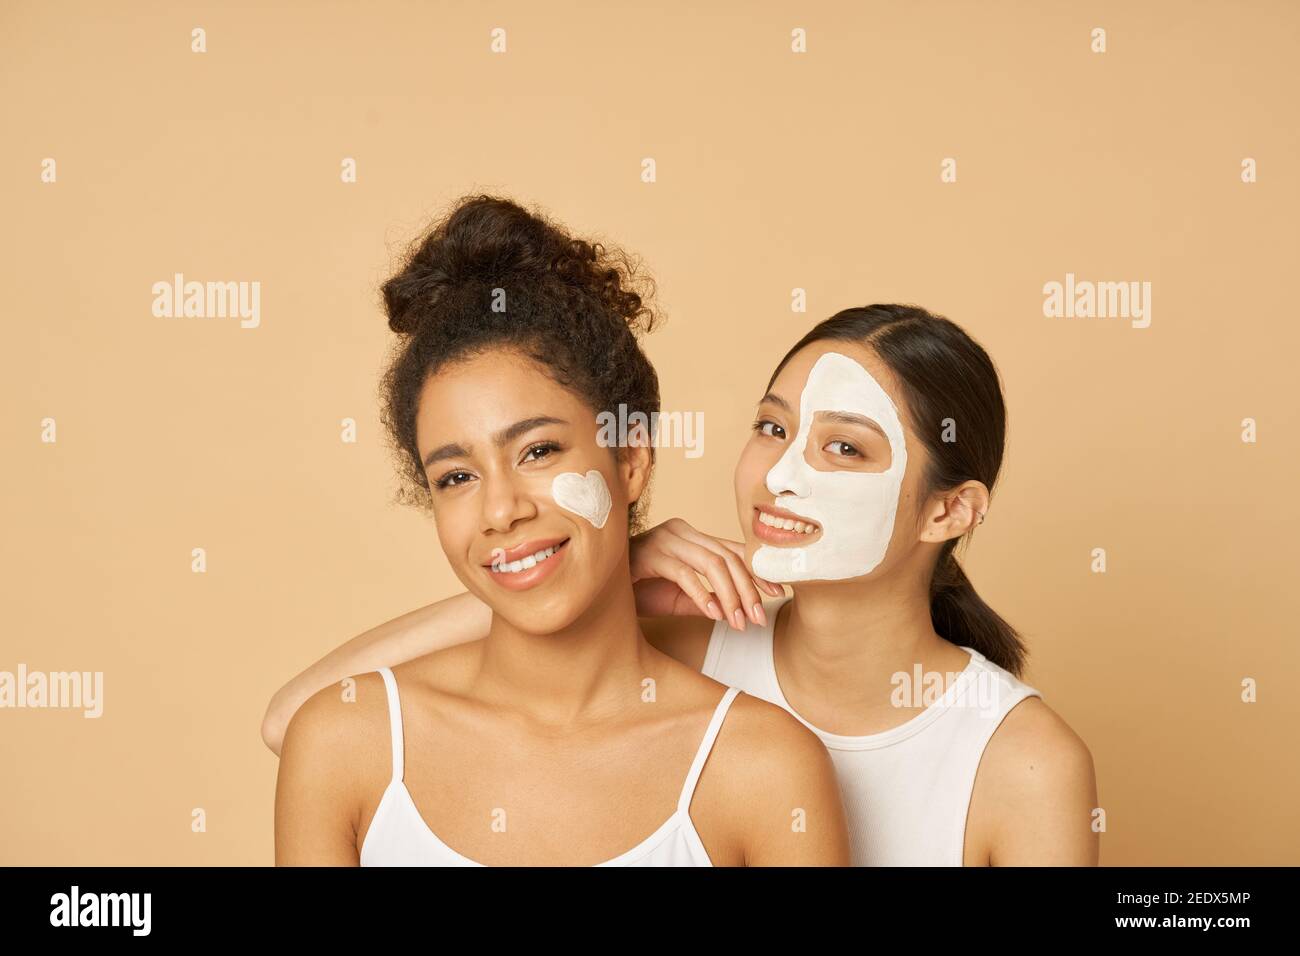 Studio shot of two young women, female friends having fun, smiling at camera while posing with facial masks on isolated over beige background. Horizontal shot Stock Photo